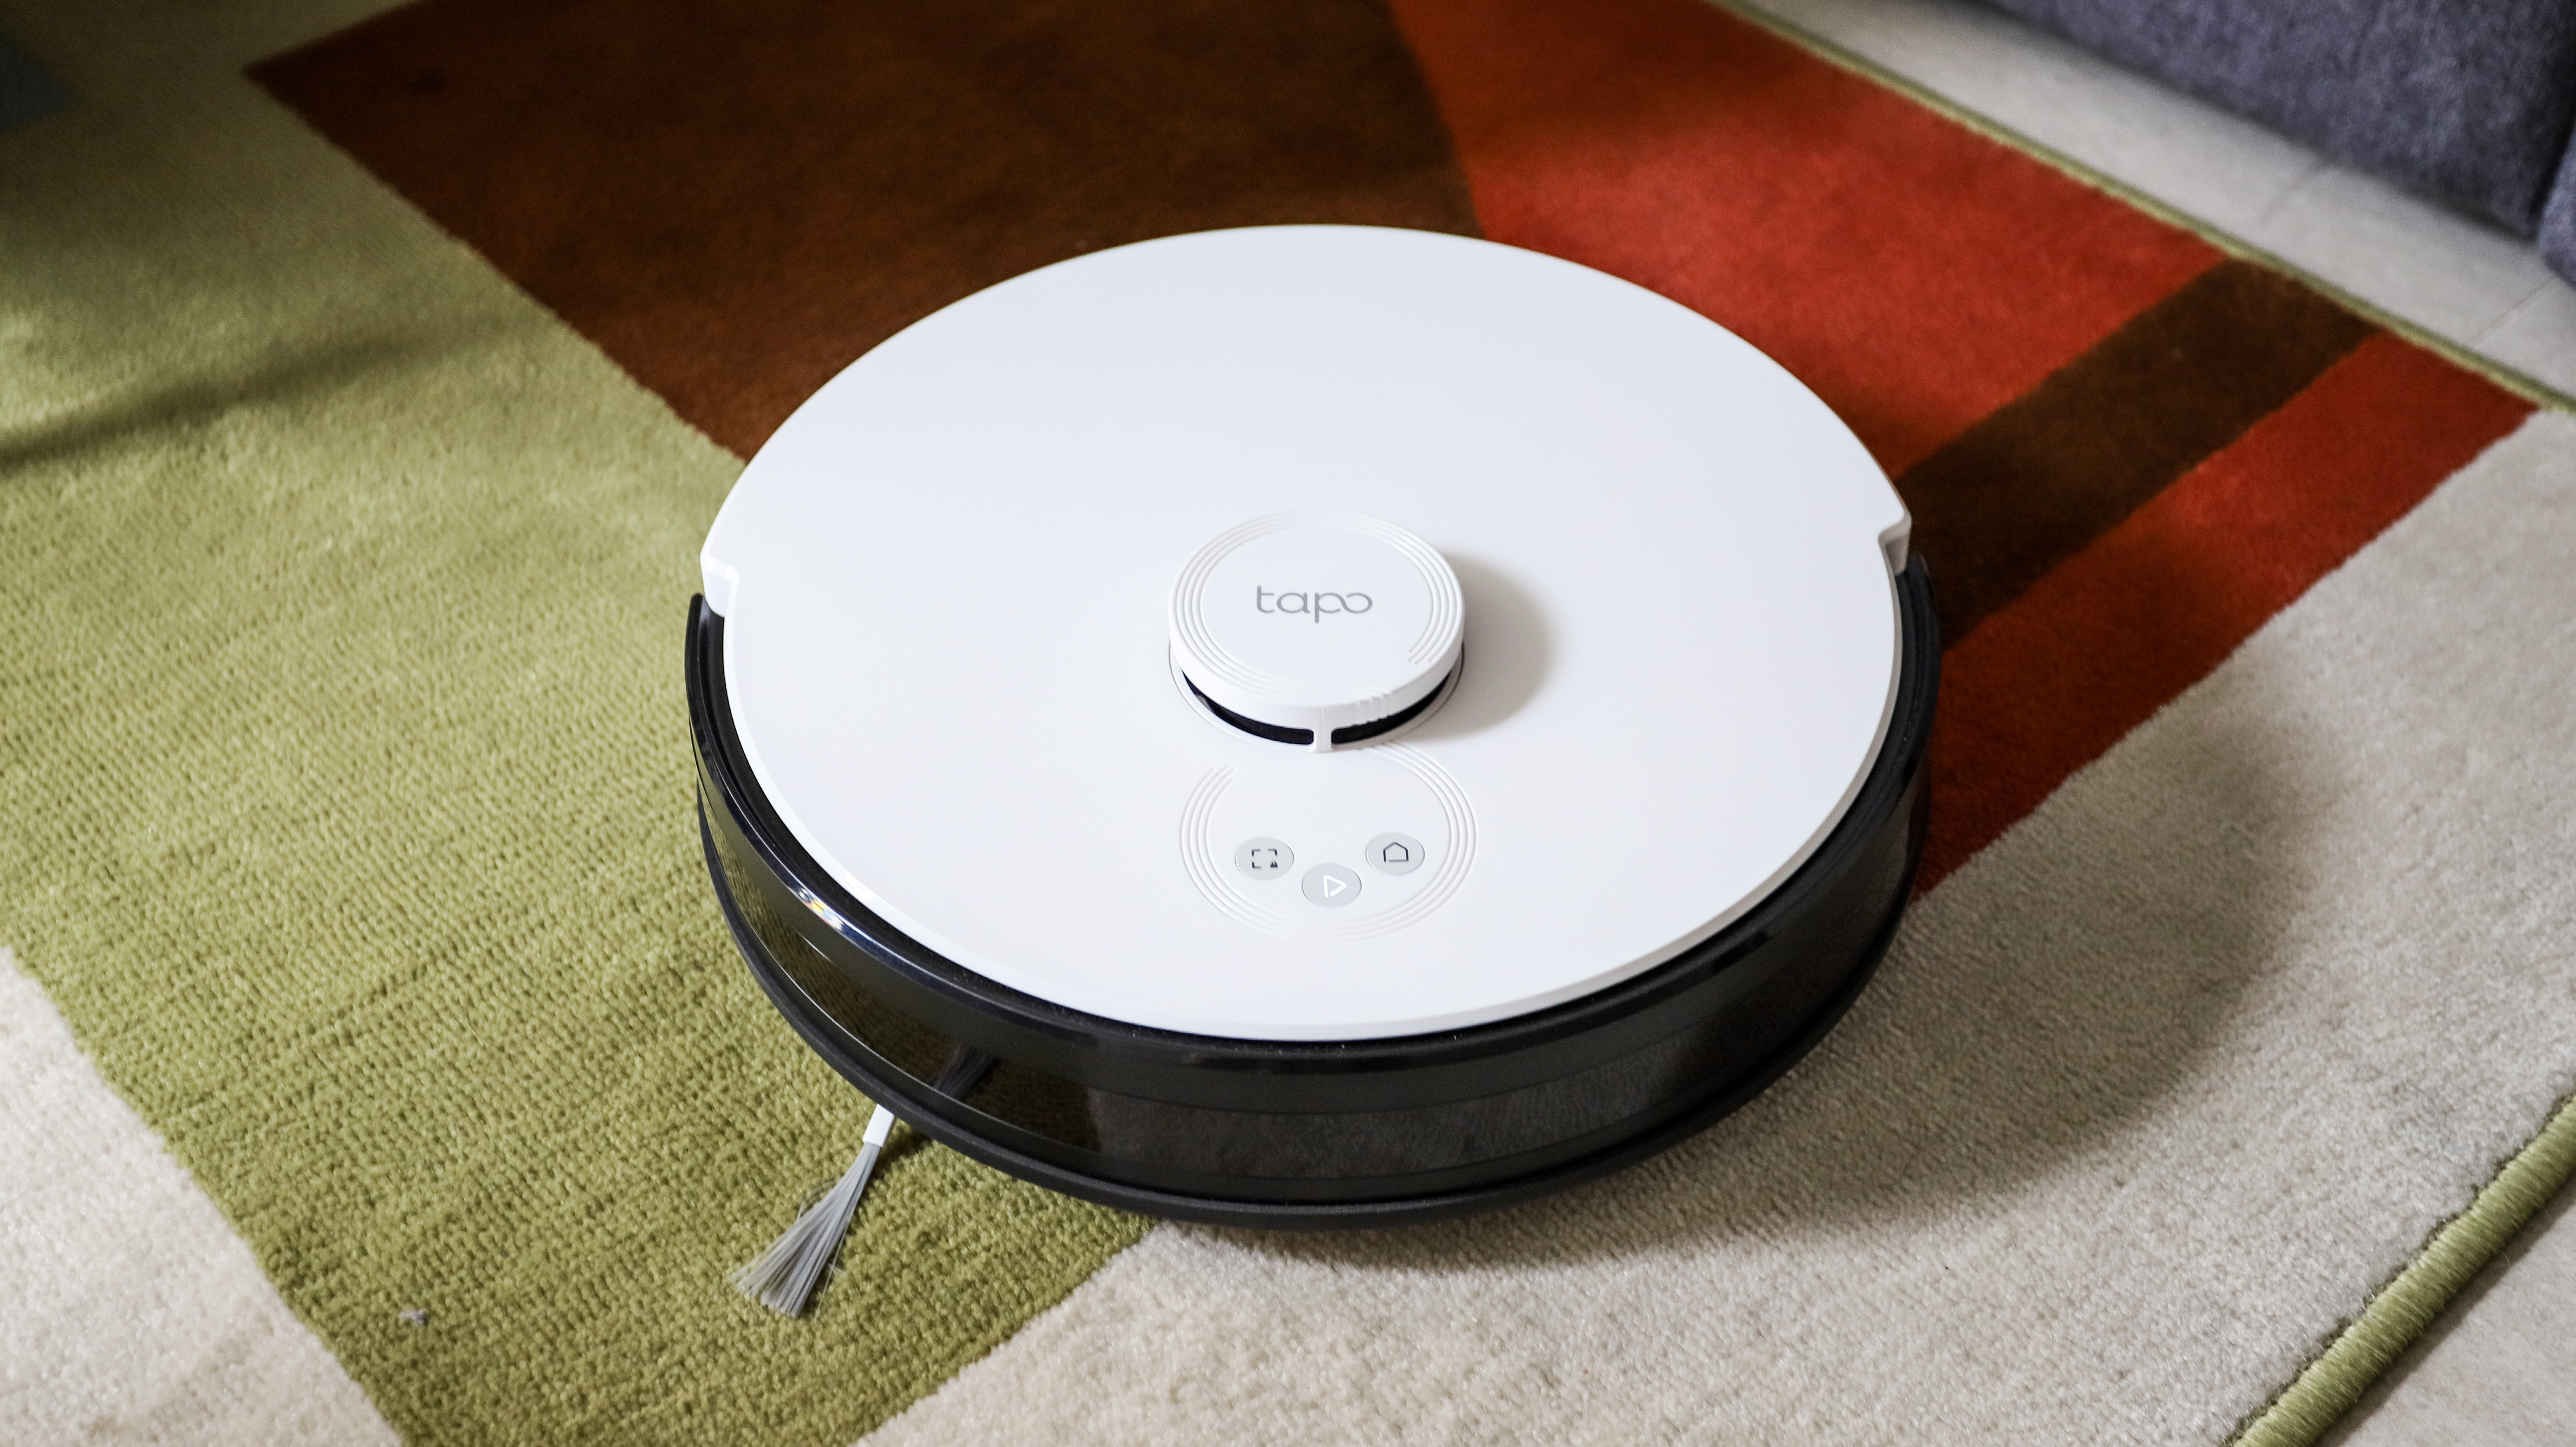 TP-Link Tapo RV30 Plus robot vacuum cleaner on a colorful carpet